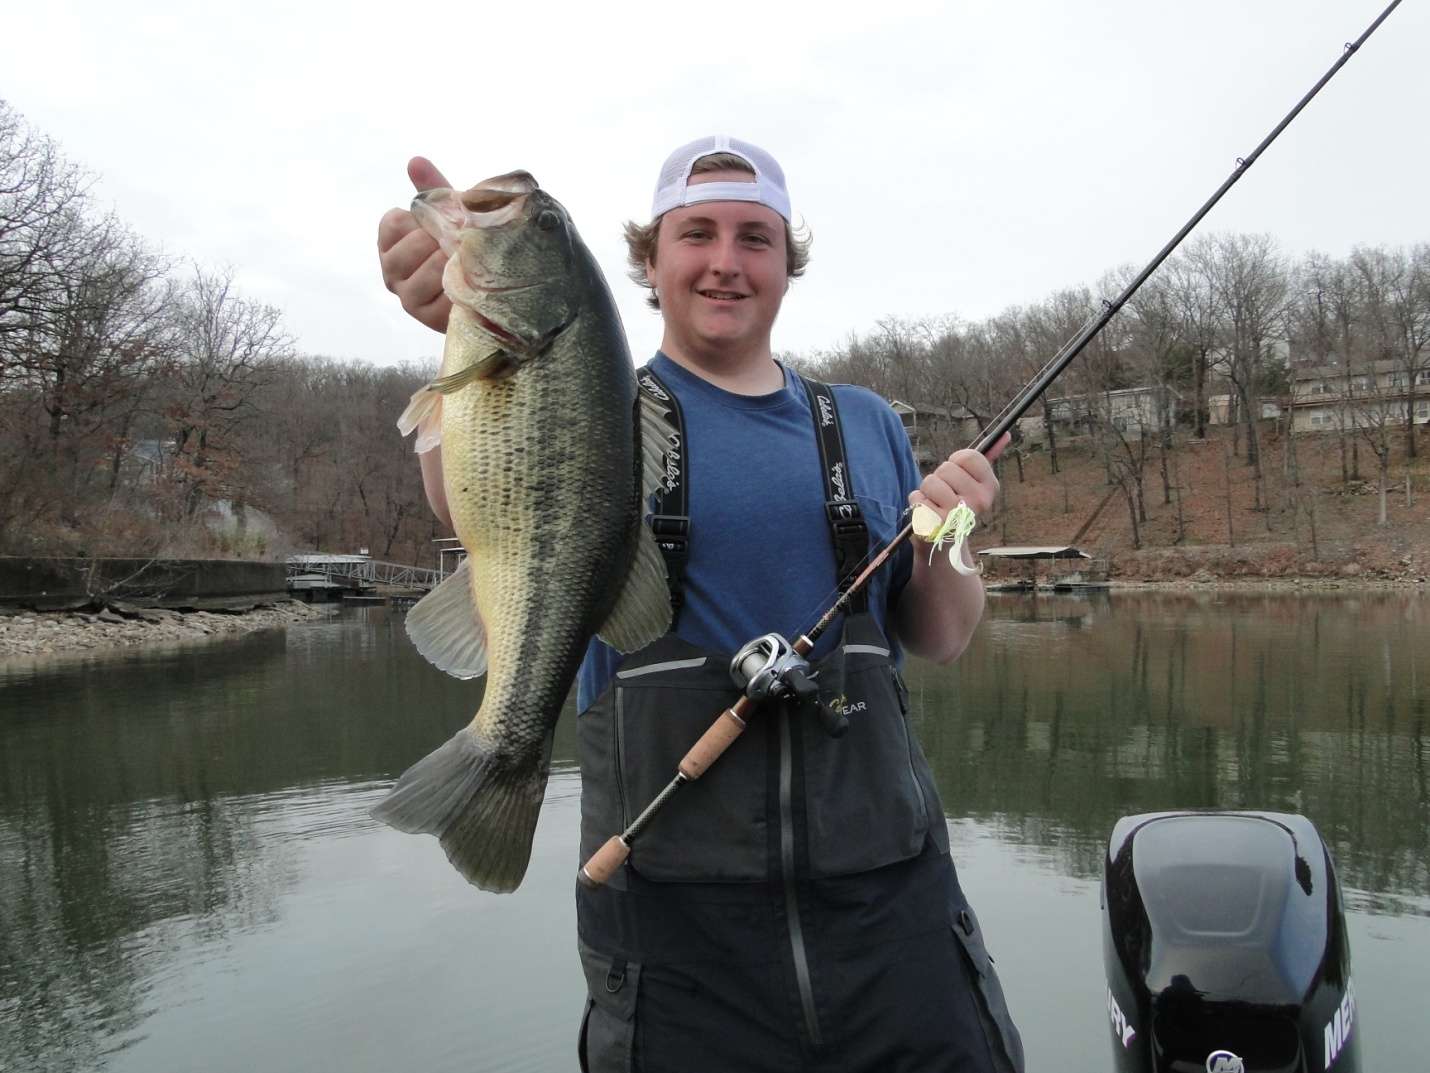 <p>Minnesota: Matt Stearns</p>
<p>
Stearns is in the 10th grade at Lakeville North High School. He and his partner won the B.A.S.S. Nation High School Northern Divisional. Stearns founded his high school fishing club in 2014. 